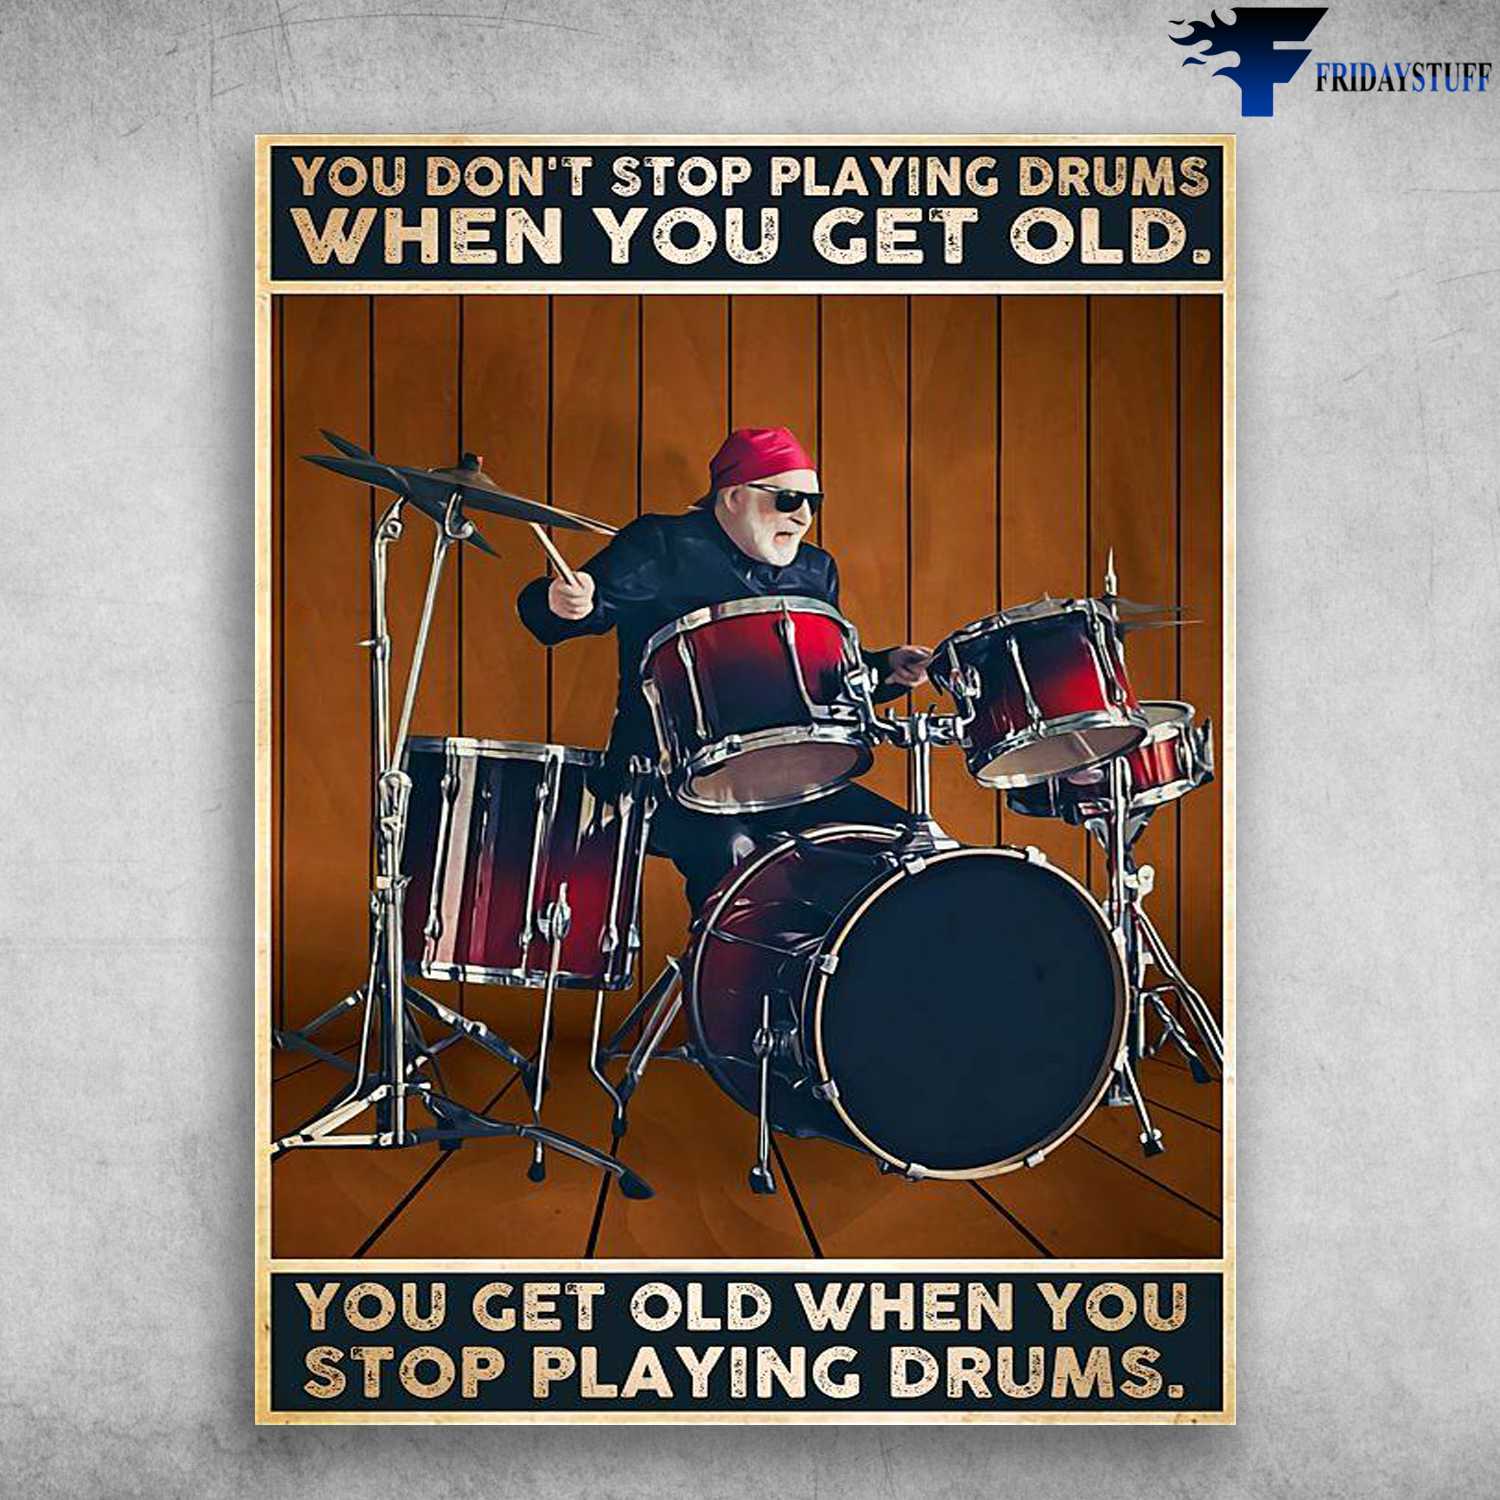 Old Man Drum, Drummer Poster - You Don't Stop Playing Drums When You Get Old, You Get Old When You Stop Playing Drums